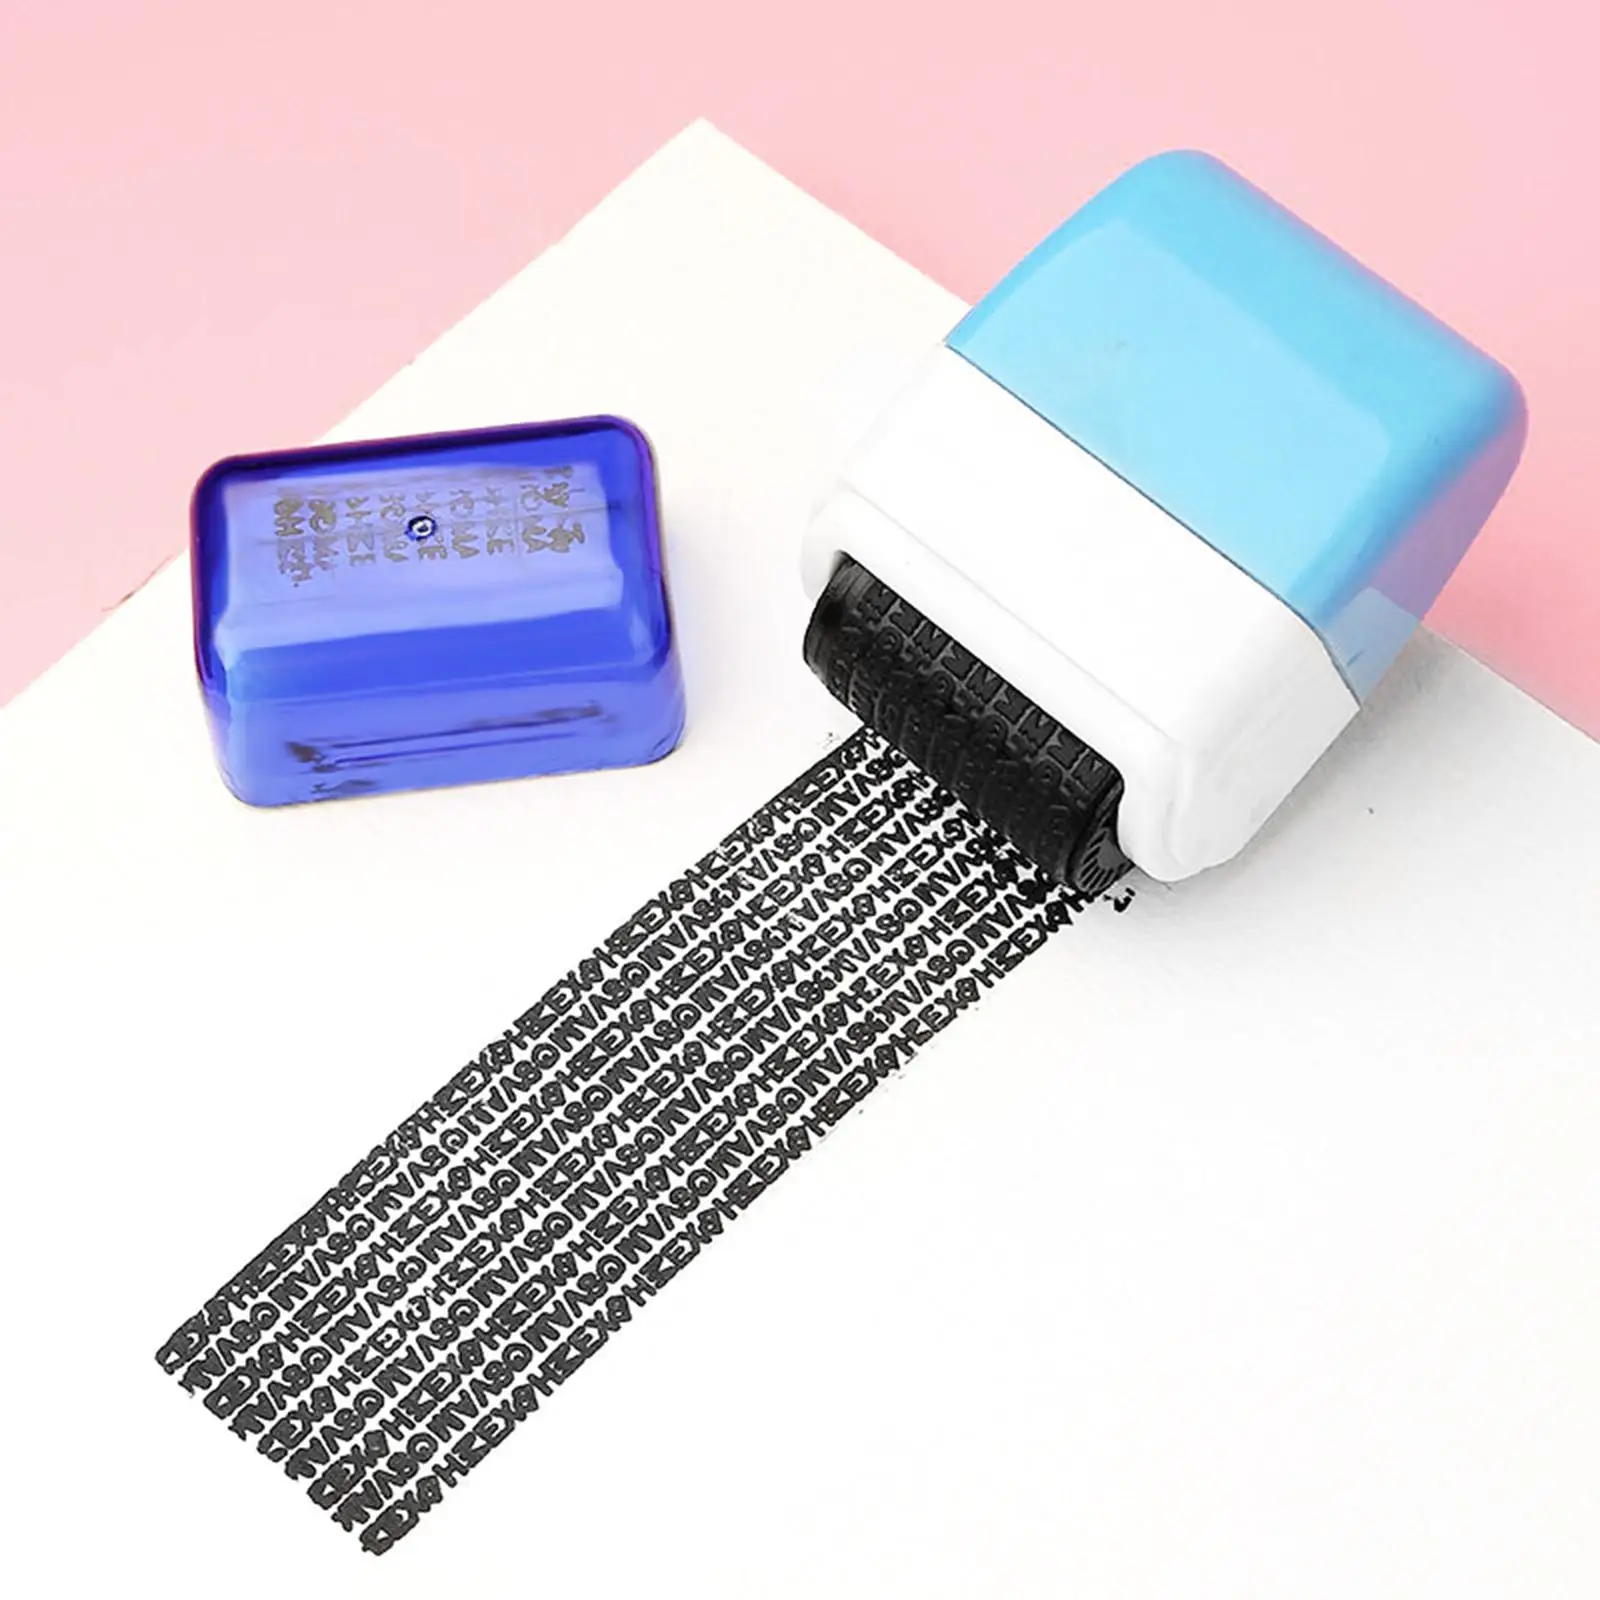 Data Protection Roller Stamp Portable Information Coverage Messy Code Privacy Confidential Data Security Seal